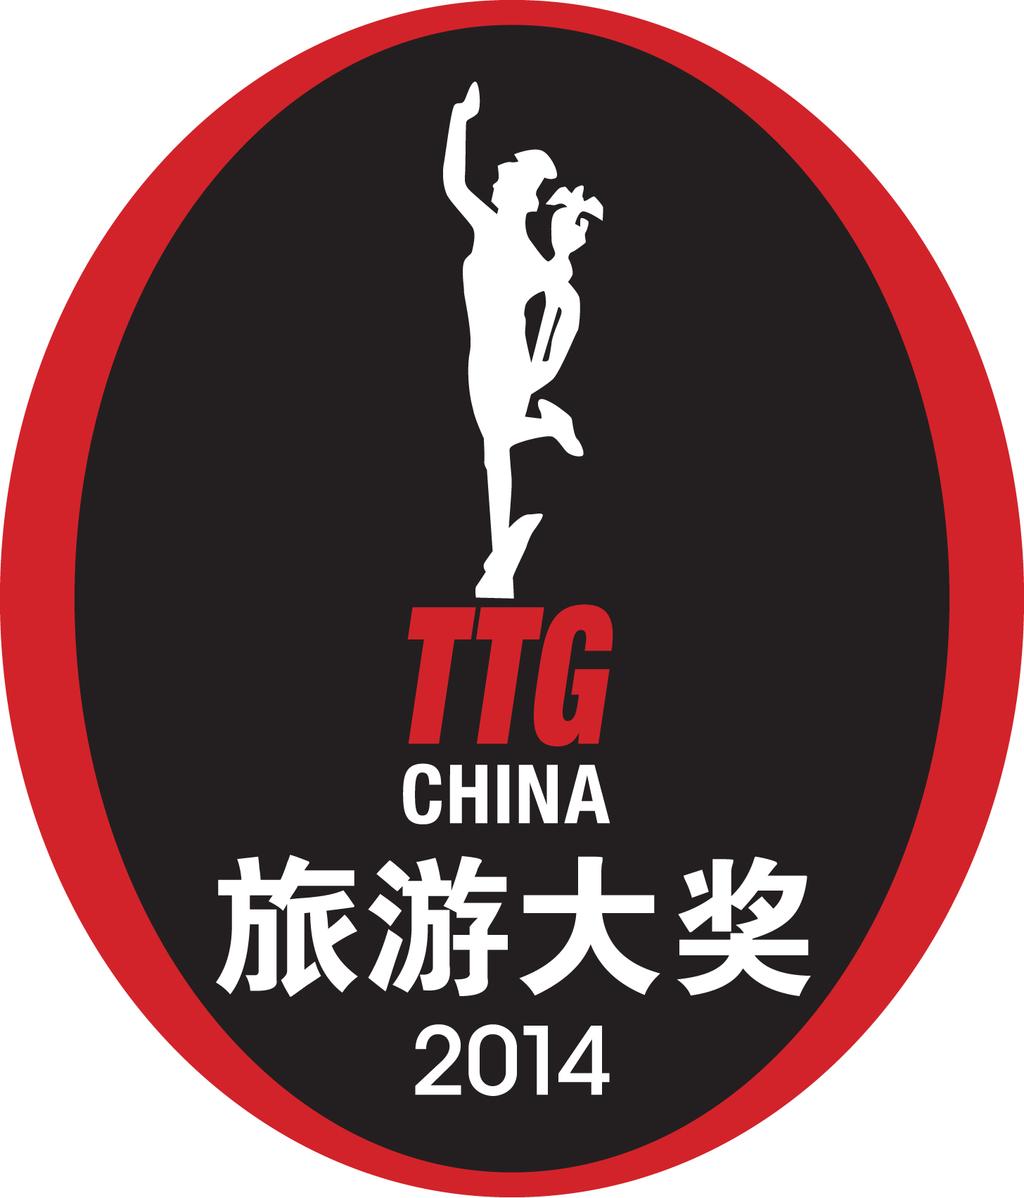 PRESS RELEASE Please embargo all information until 17 th April 2014, 10pm Shanghai Time 60 Greater China Industry Leaders Reign at the 7 th Annual TTG China Travel Awards Shanghai, 17 April 2014